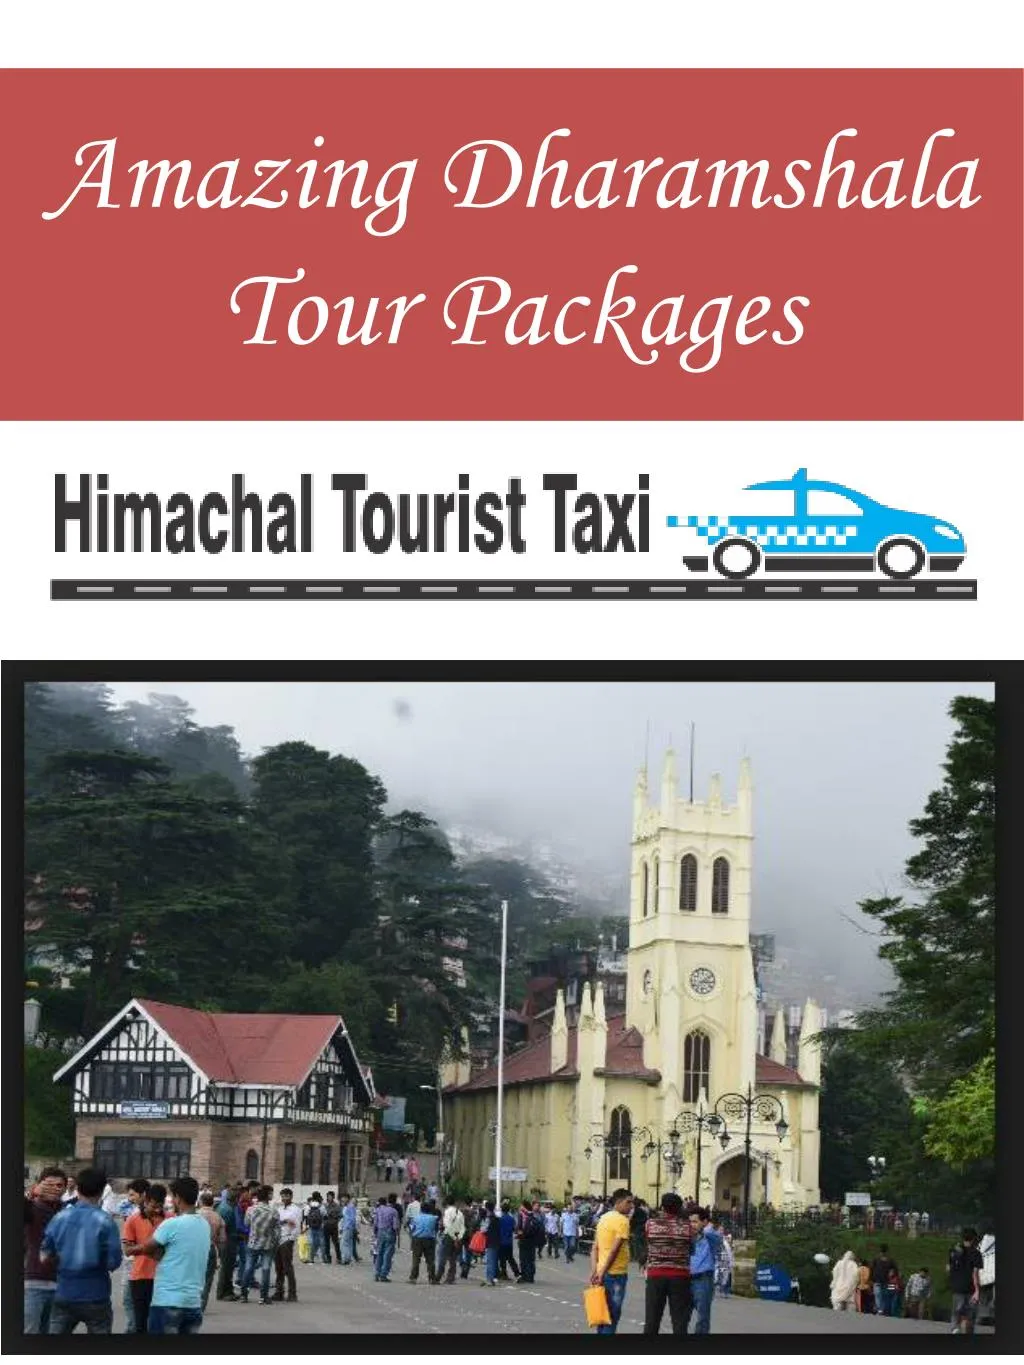 amazing dharamshala tour packages